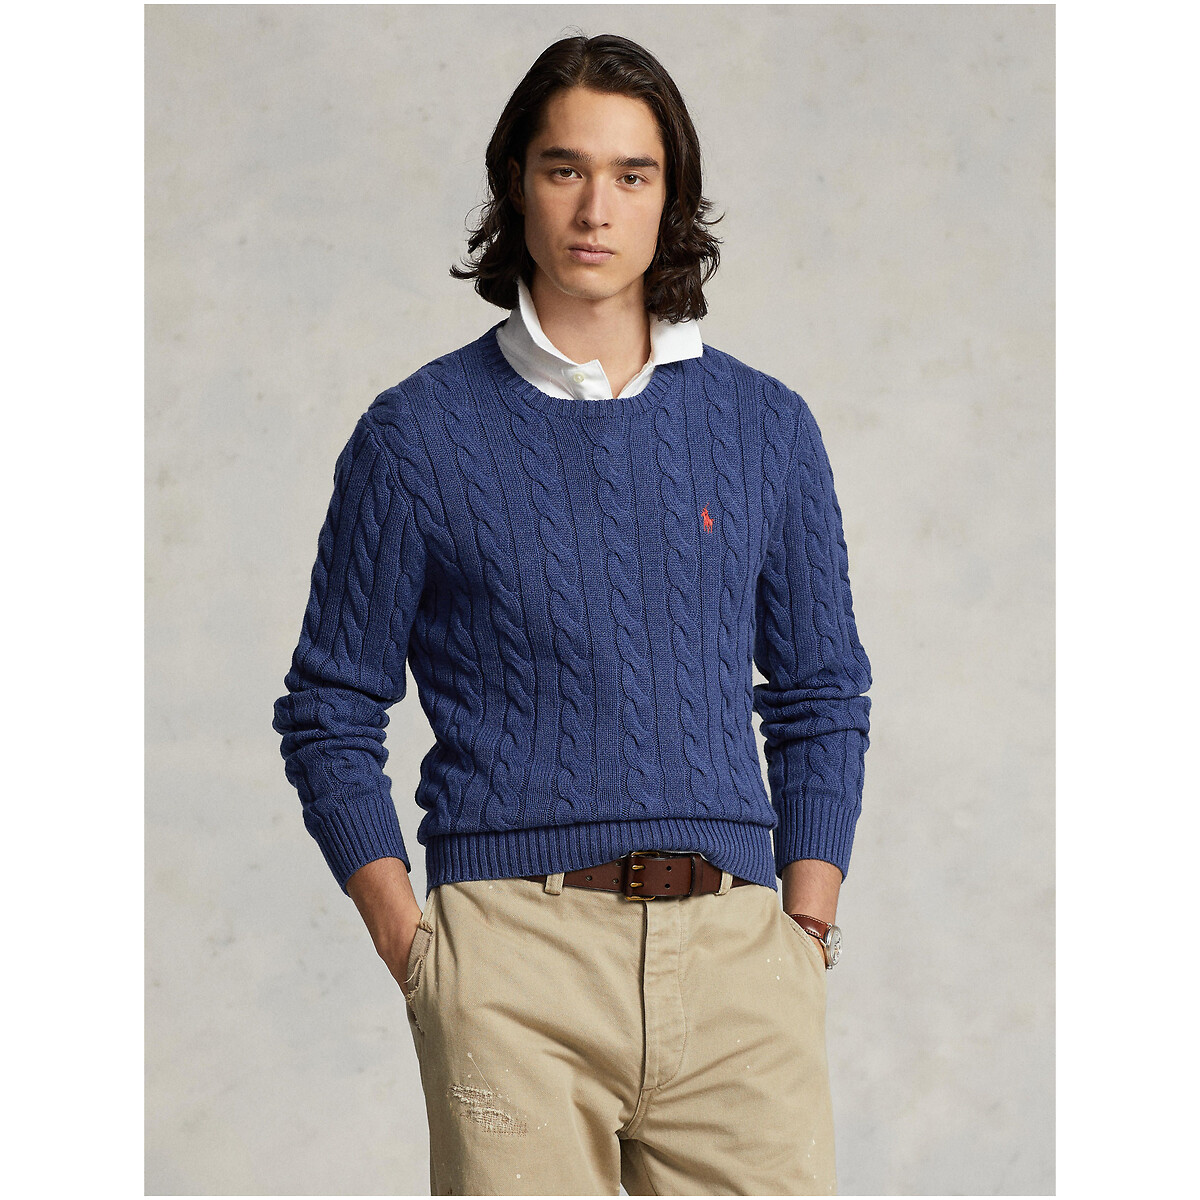 Cotton cable knit jumper with crew-neck, dark blue, Polo Ralph Lauren ...